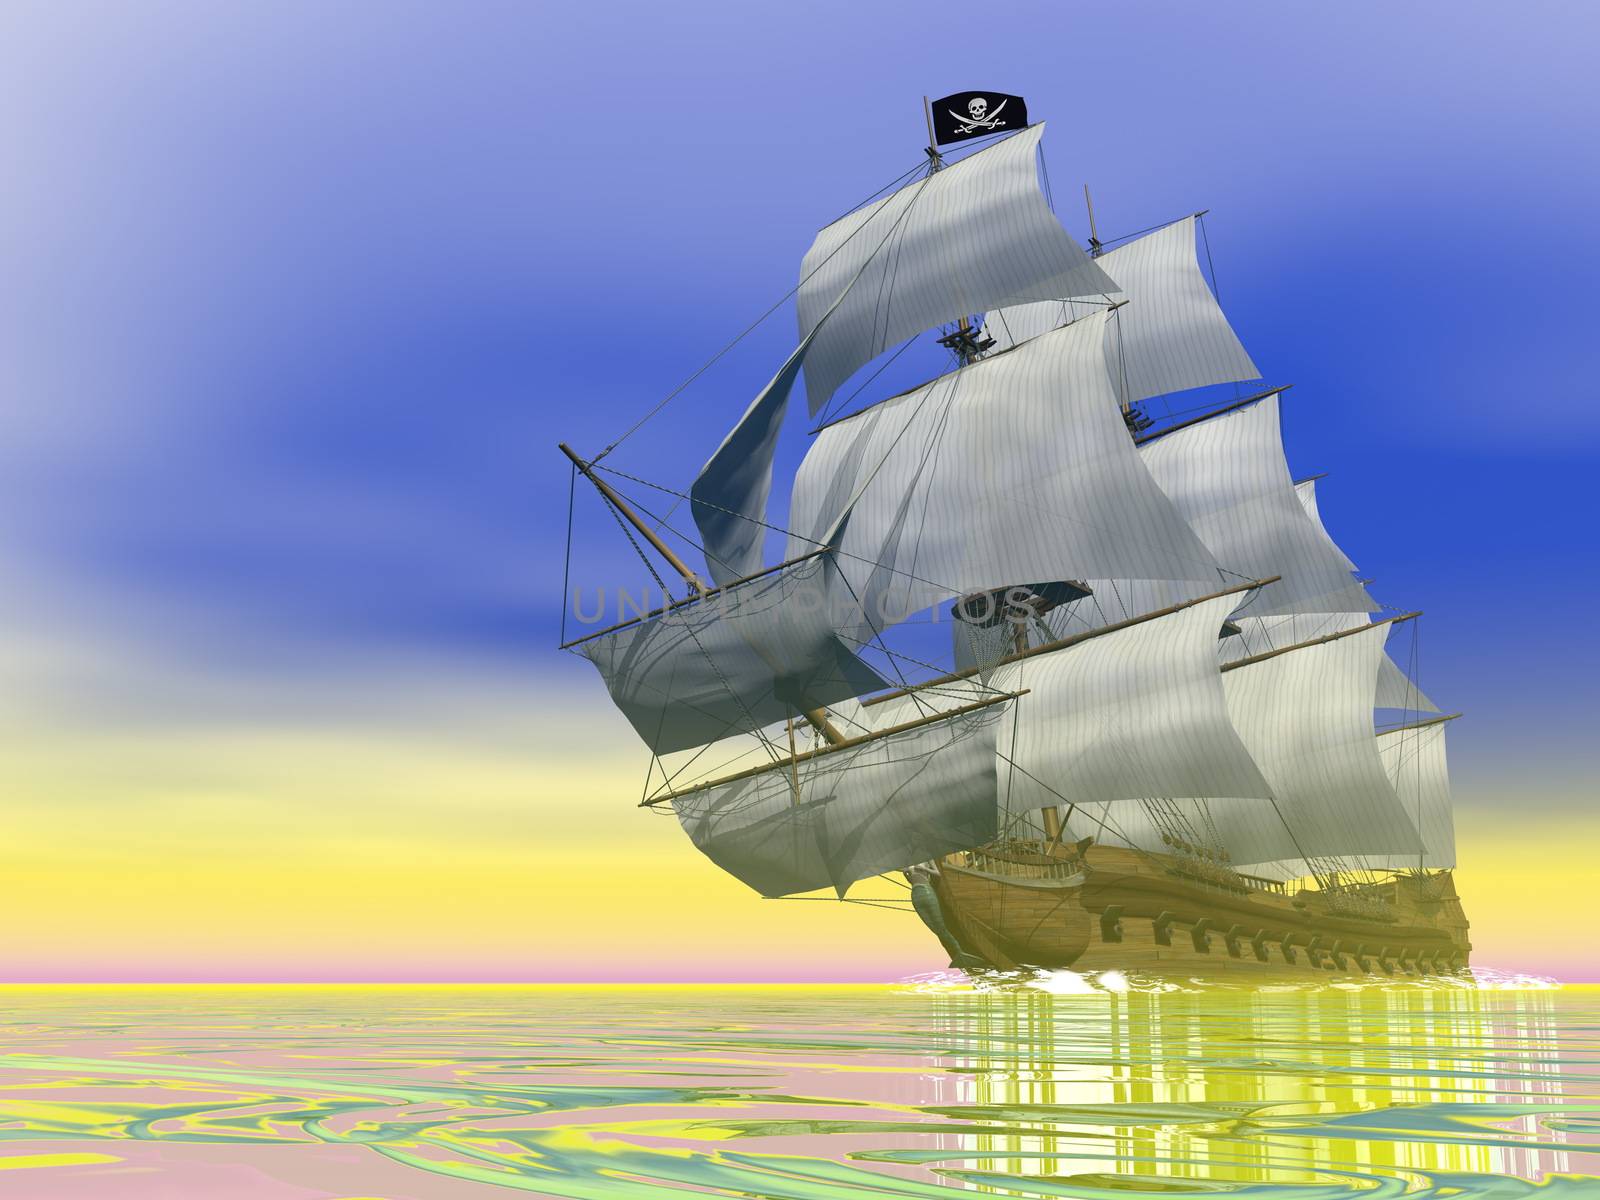 Beautiful detailed Pirate Ship, floating on the ocean by yellow day - 3D render